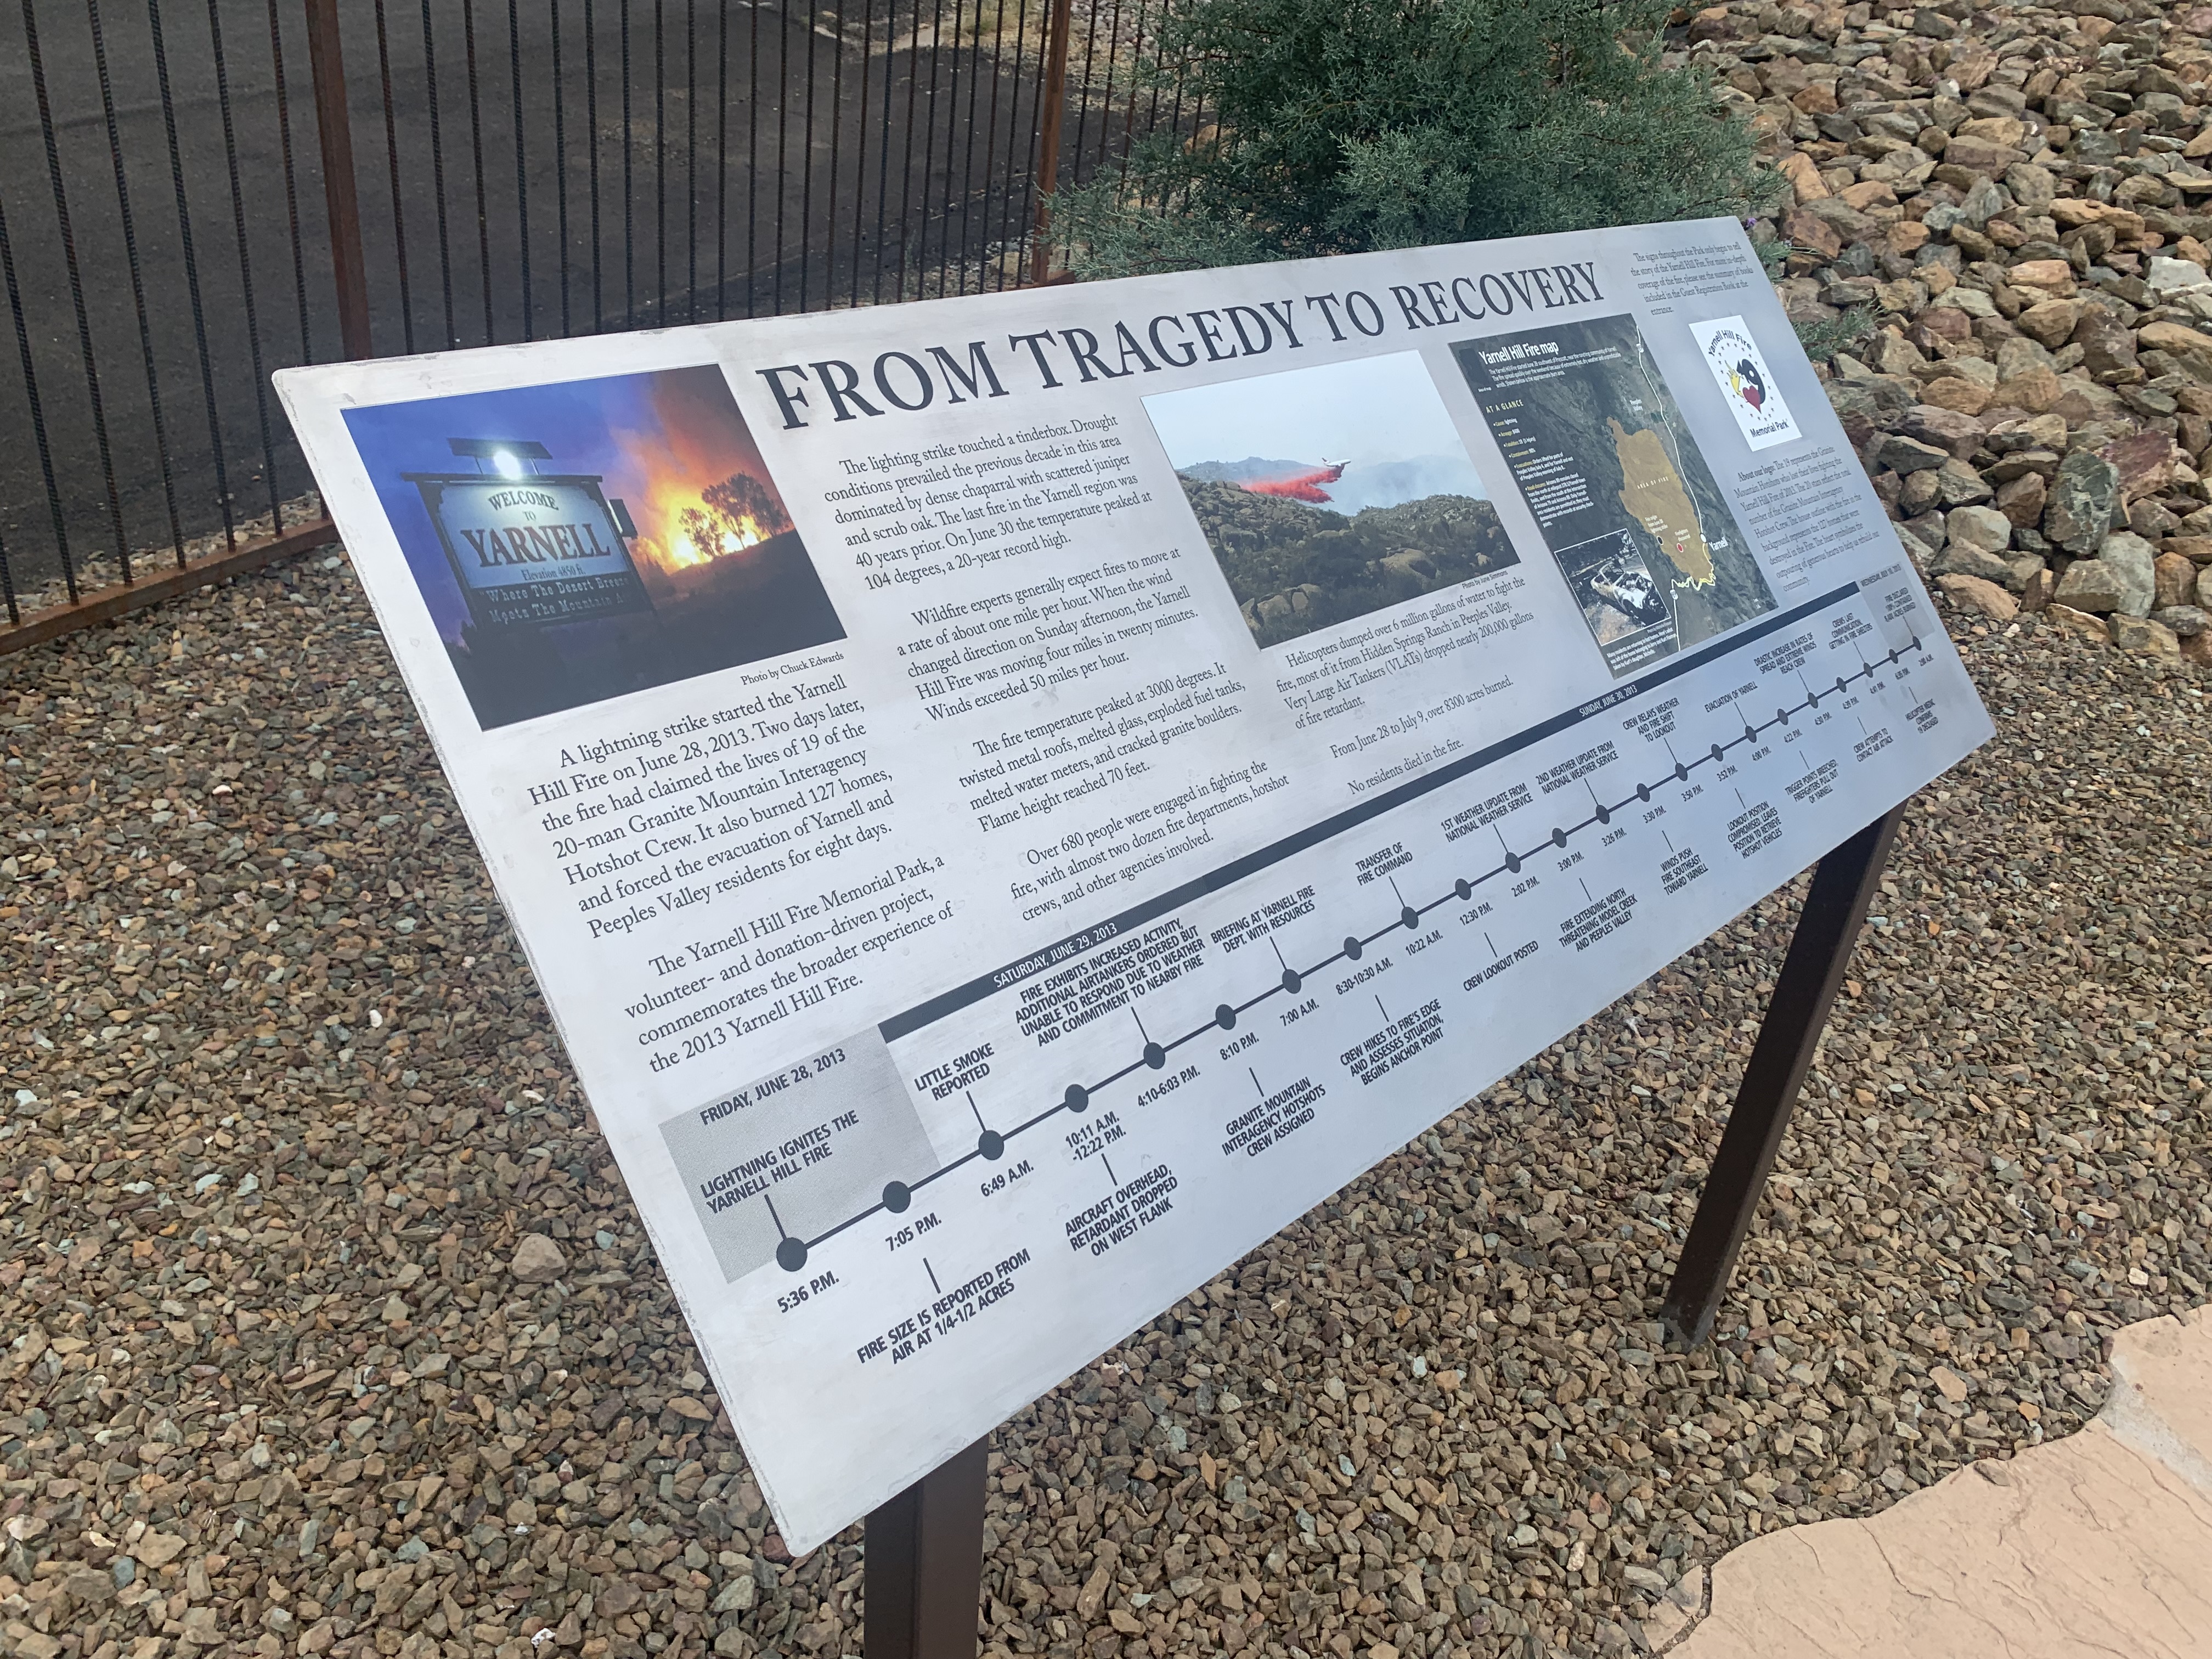 A photo of one of the interpretive signs in the park - from tragedy to recovery